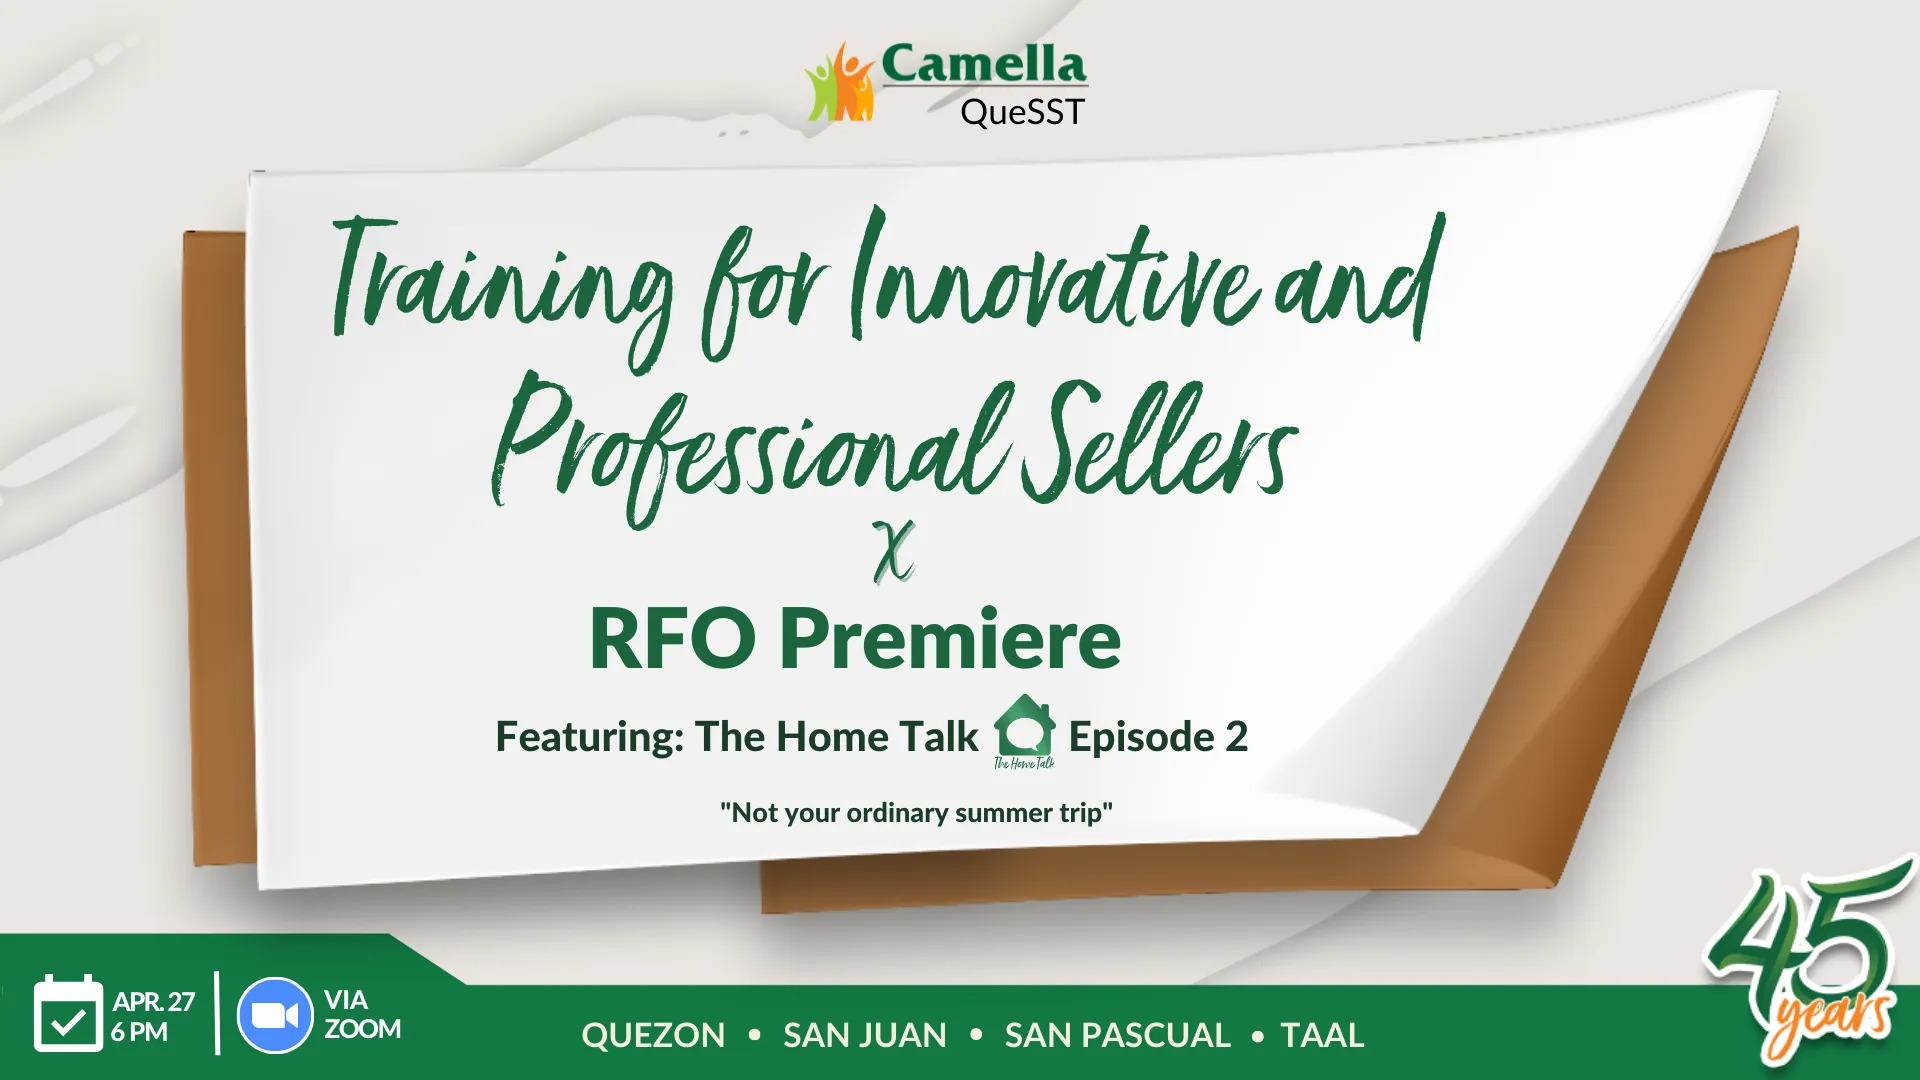 camella quesst grand tips and rfo expo april 2022